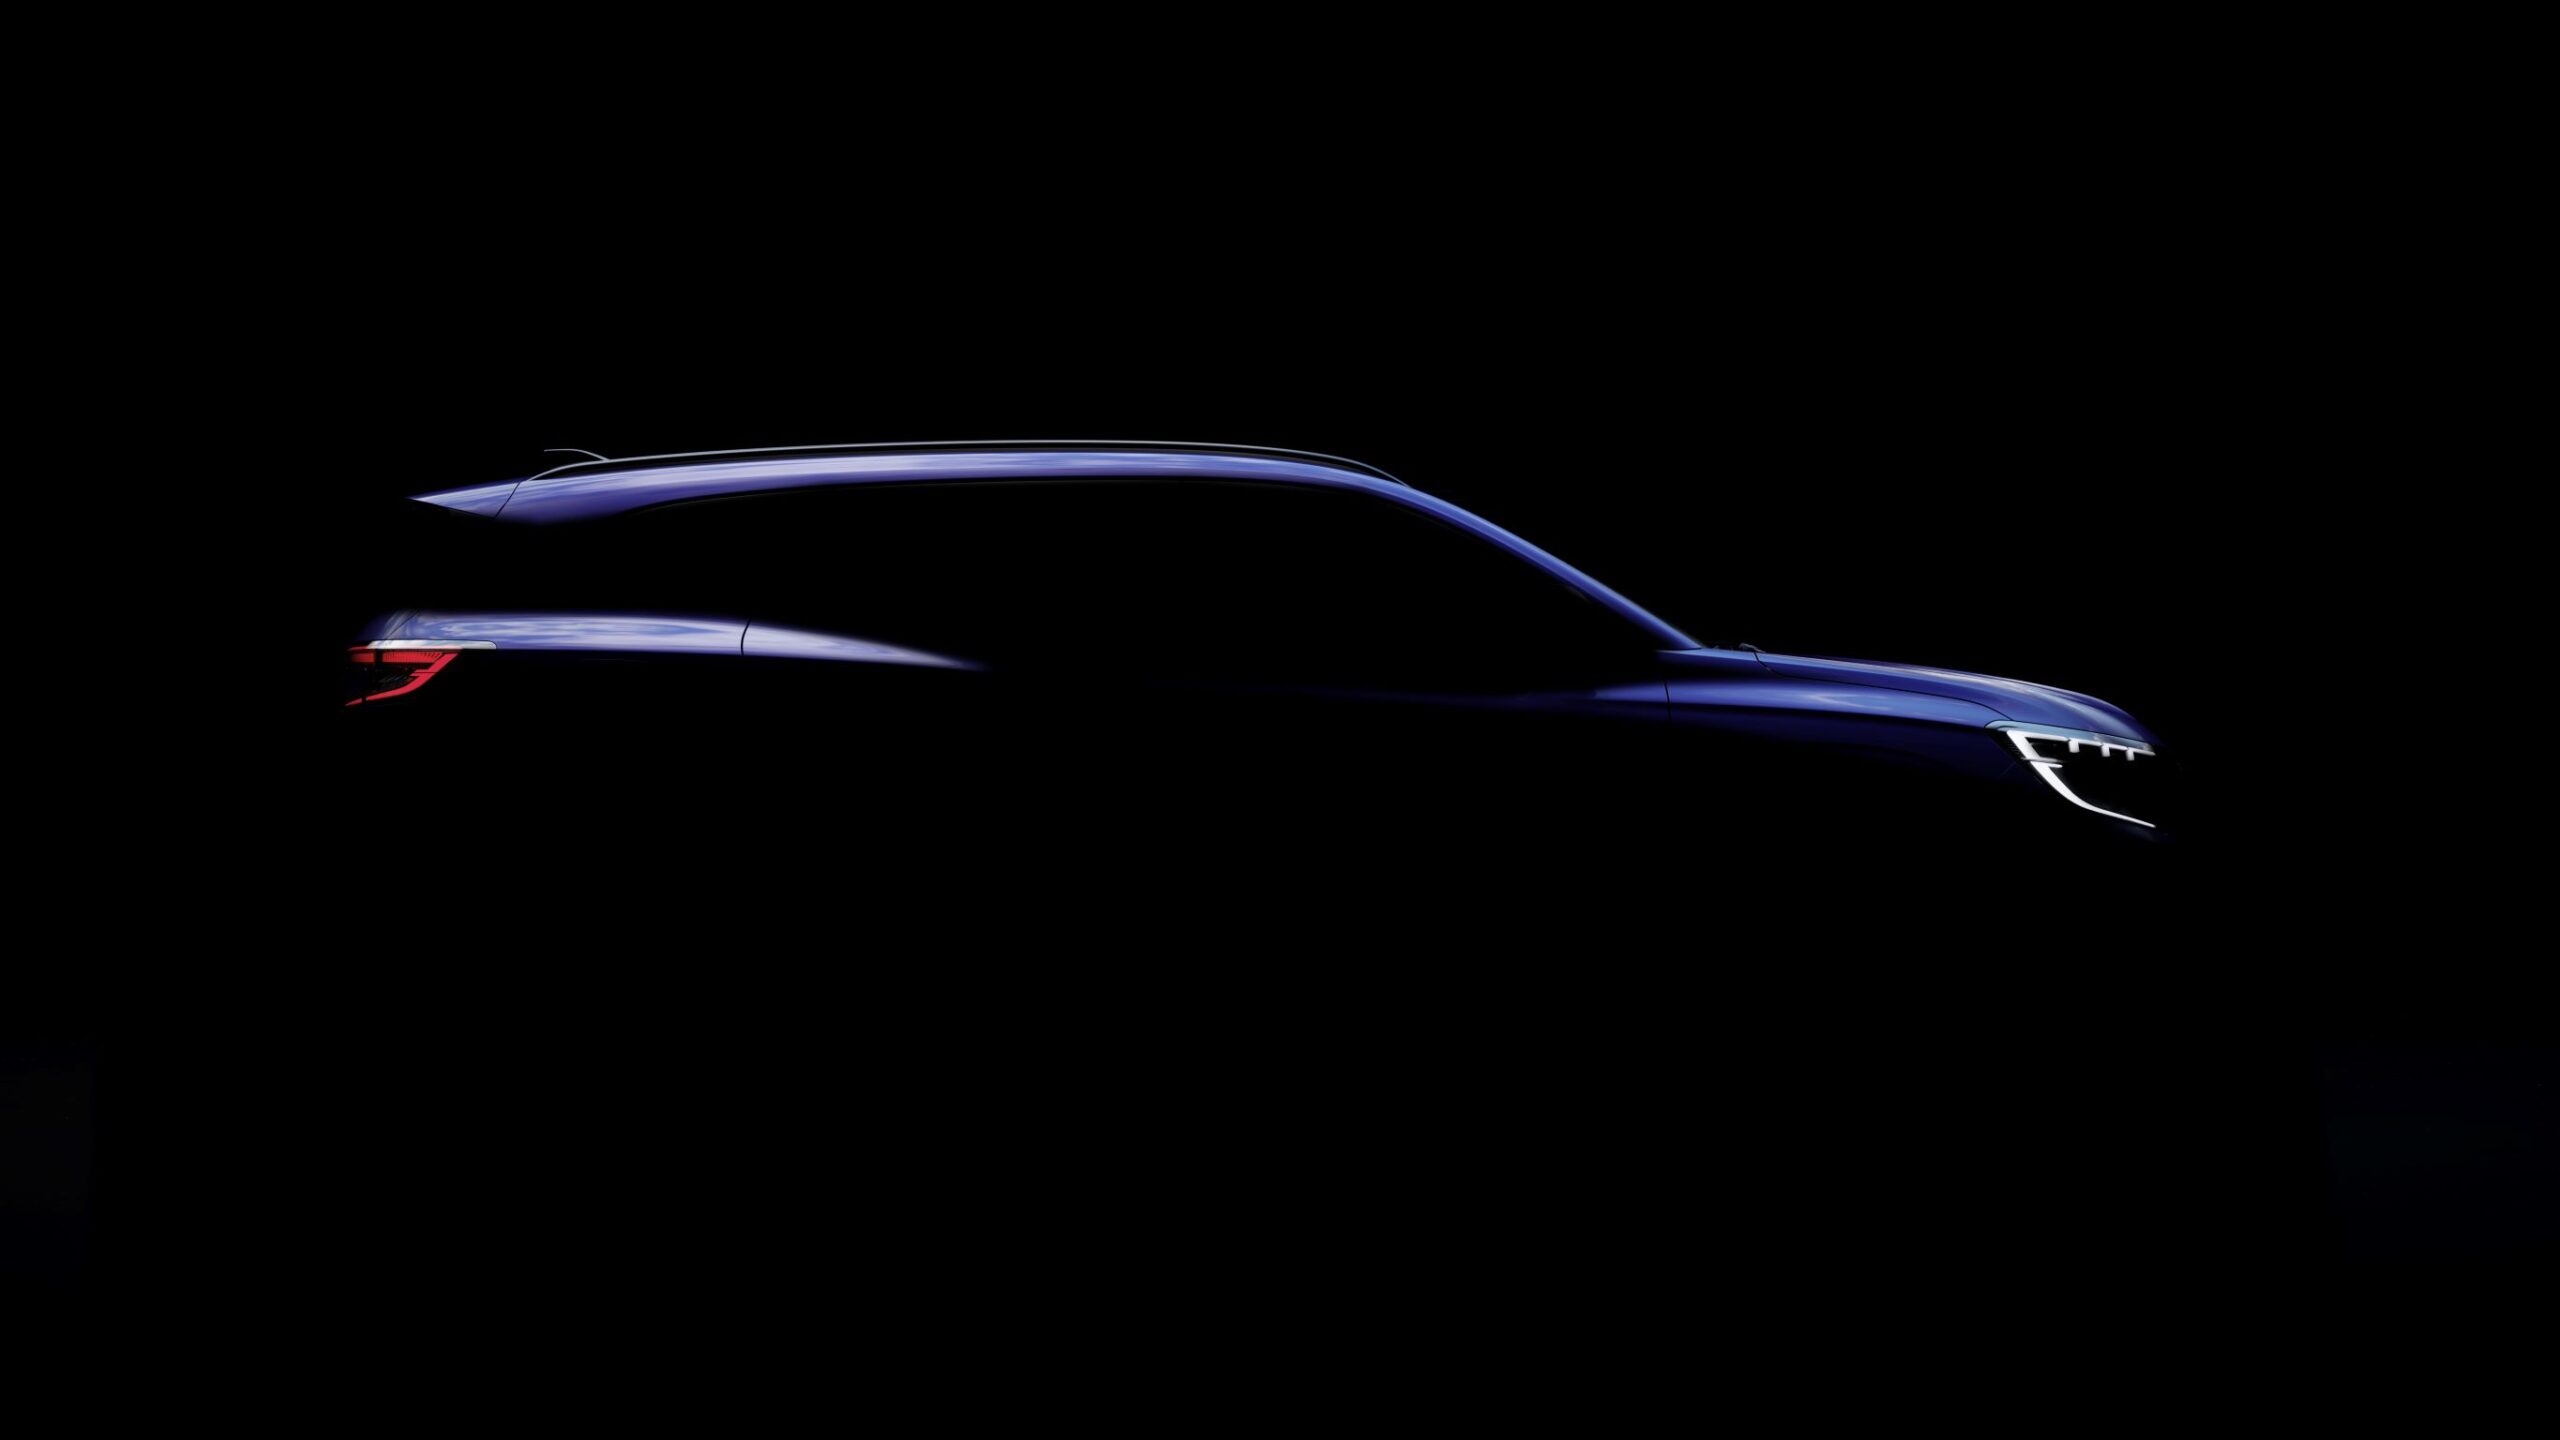 A teaser image of the silhouette of the soon to be released Renault Espace.